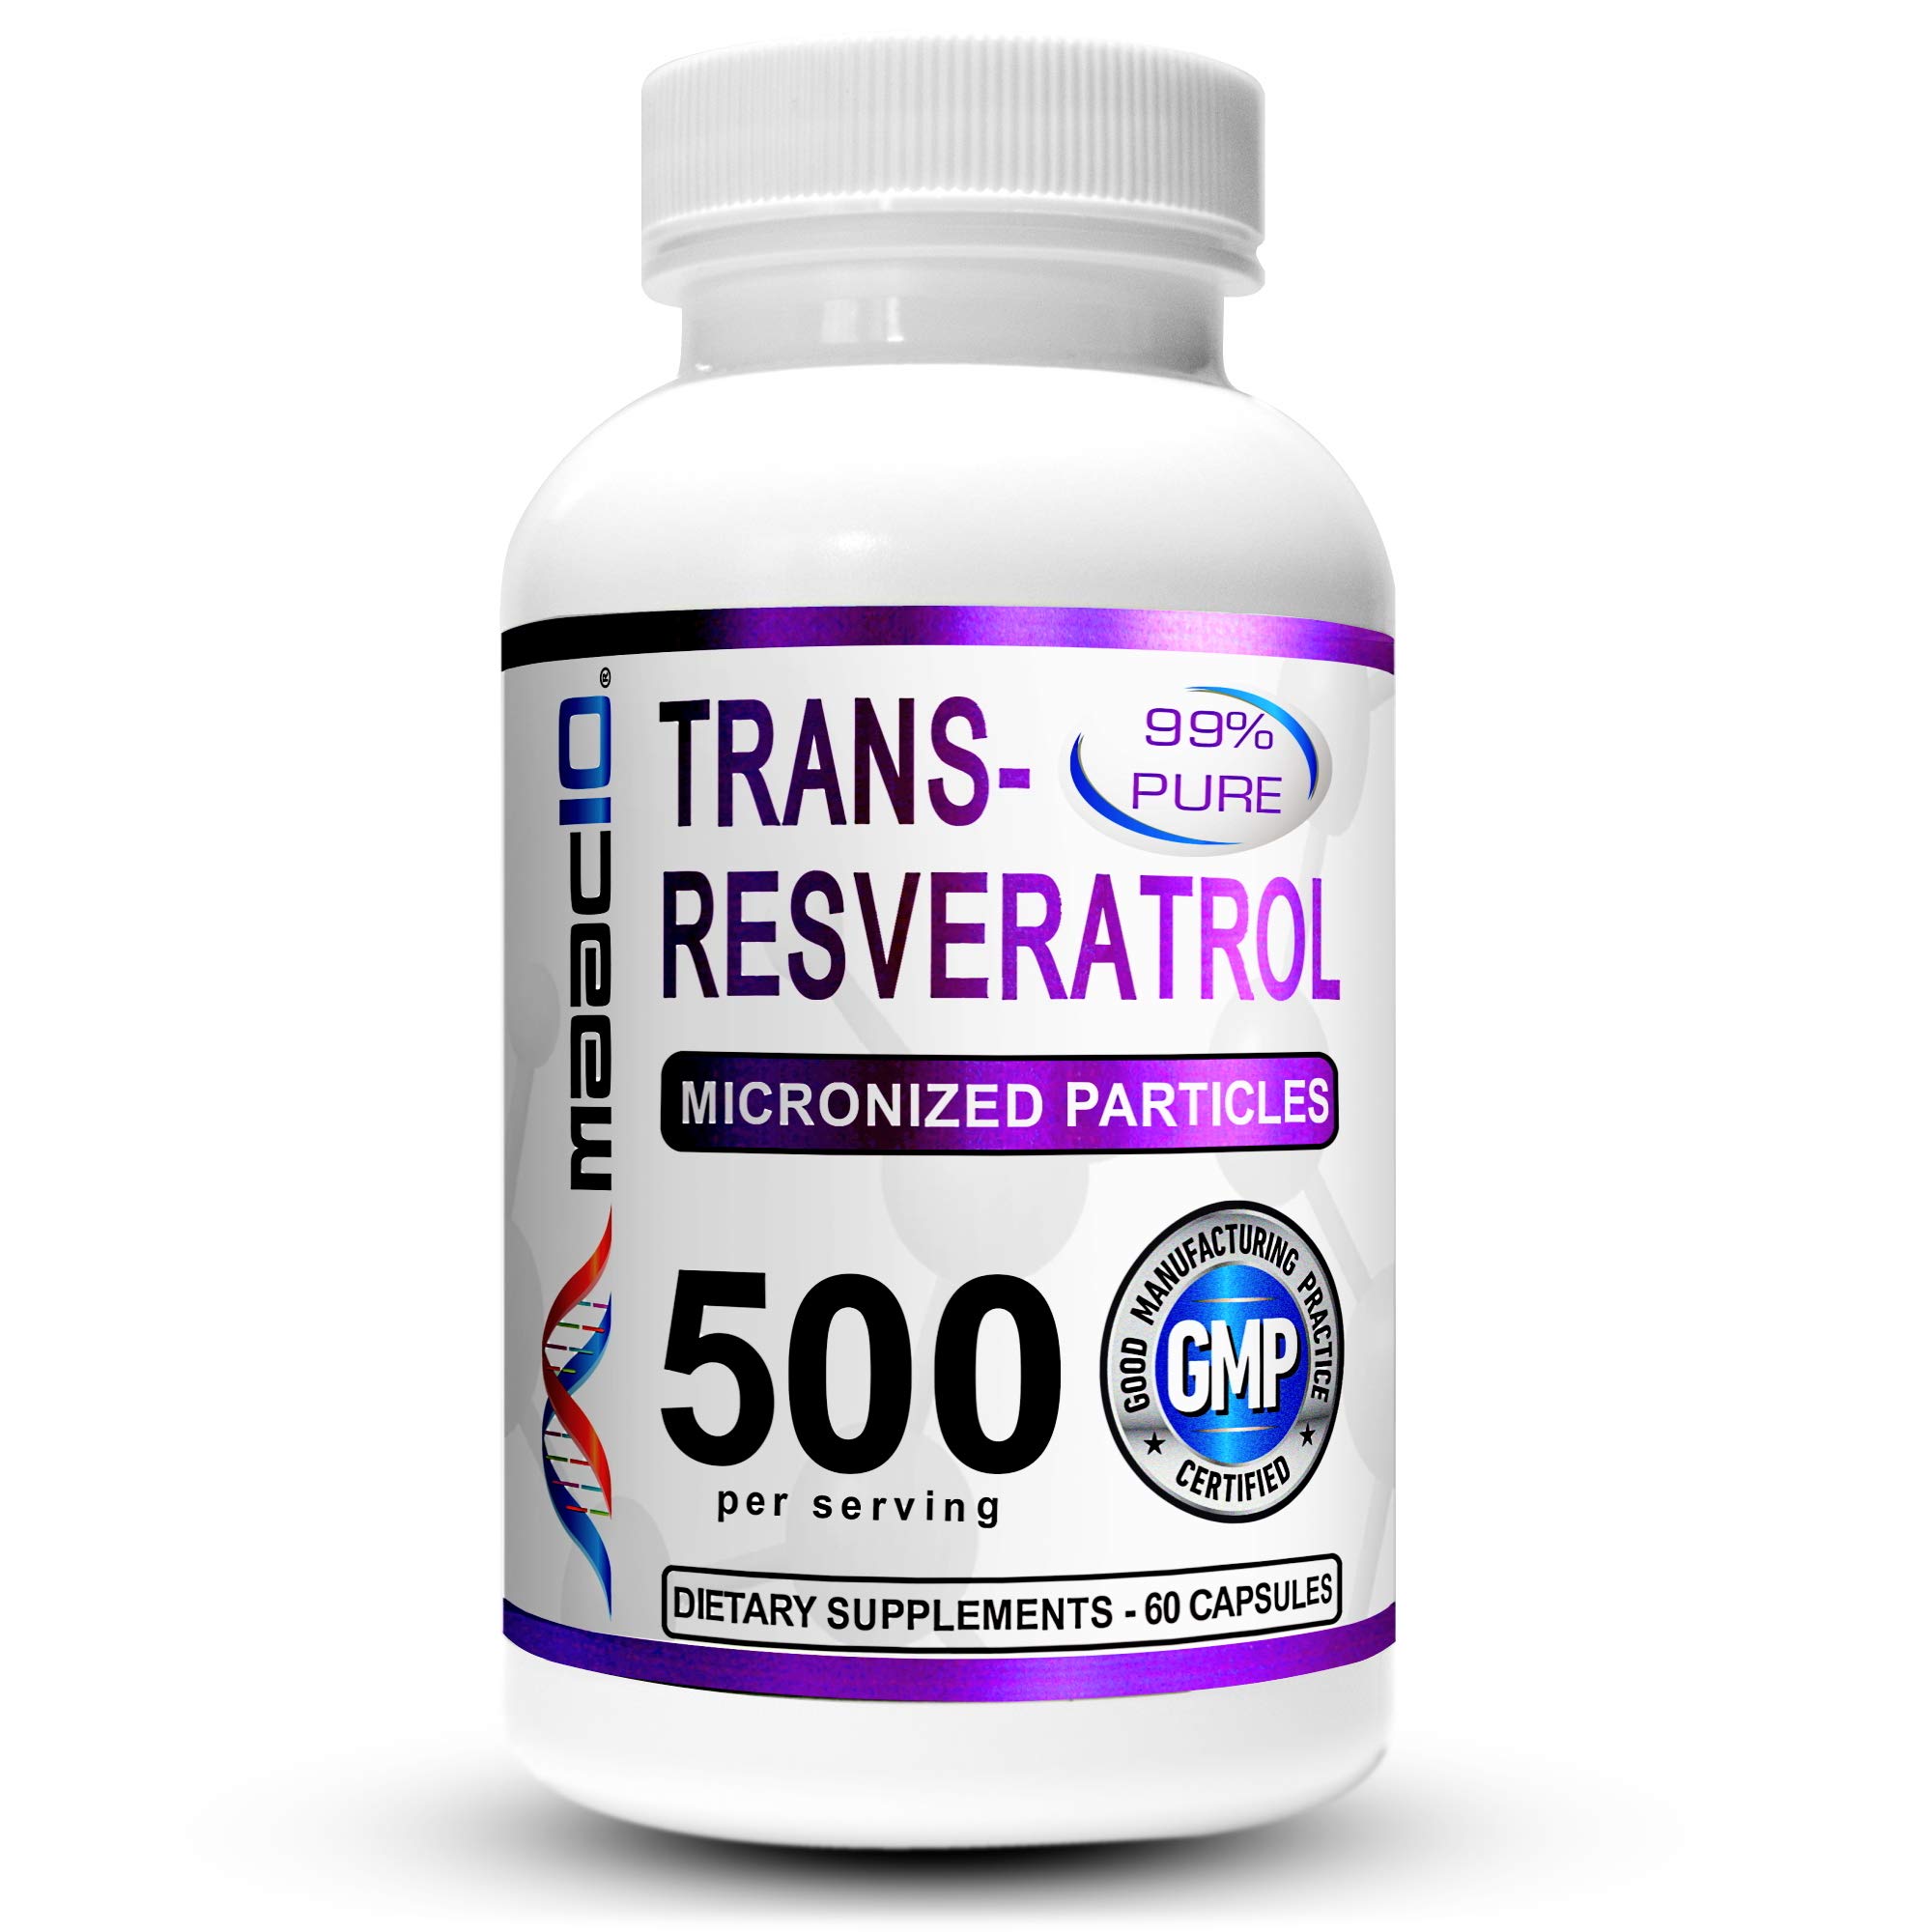 Book Cover MAAC10 - Trans Resveratrol 500mg Supplement (Micronized Pharmaceutical Grade 99% Pure Trans-Resveratrol Extract + BioPerine for Superior Absorption) (2X 250mg Capsules 60ct)